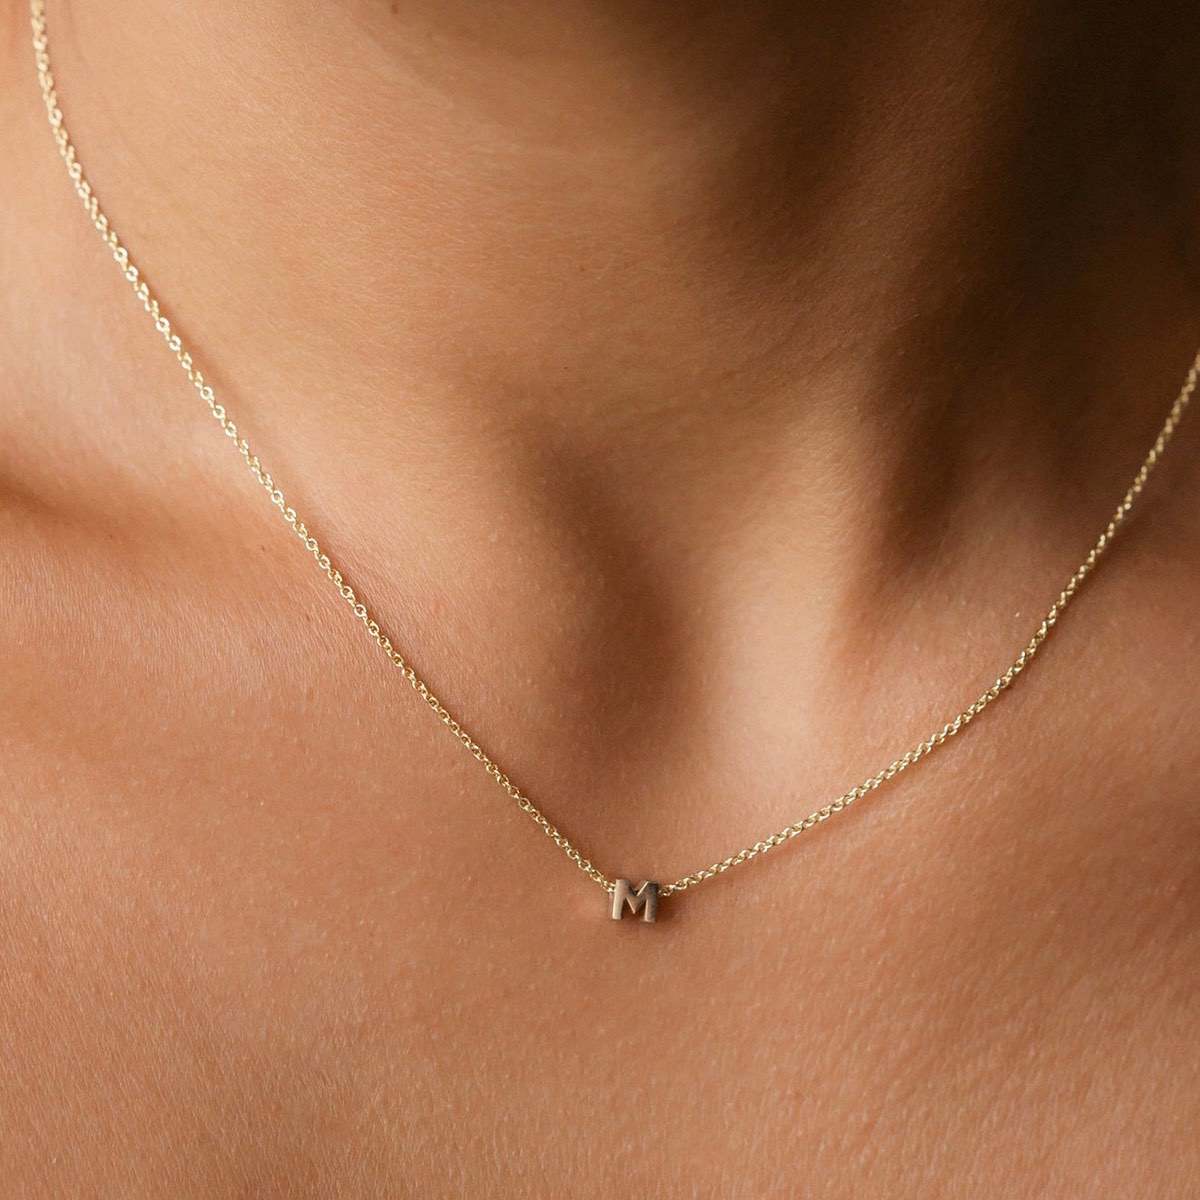 Hand finished solid gold letter necklace: Close up of a model wearing our beautiful 9ct yellow gold Tiny Letter M Charm Necklace with a 40cm cable chain